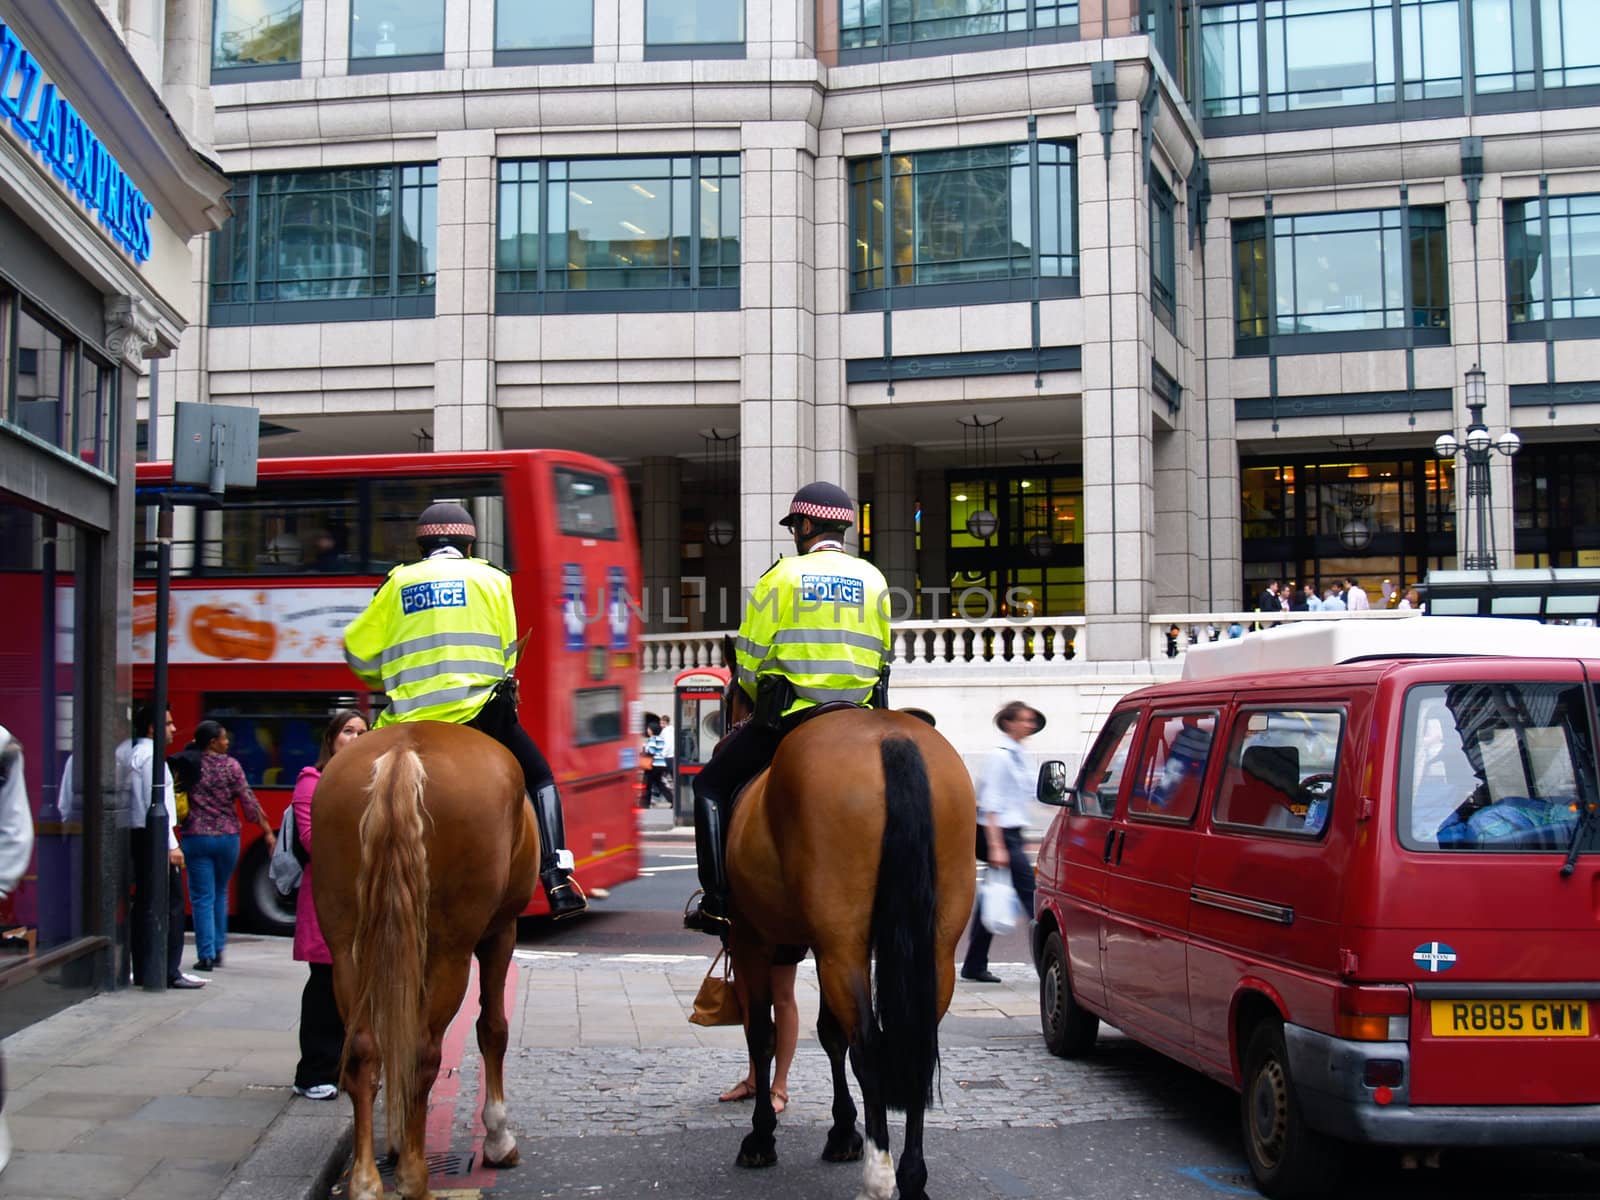 Mounted police in London. by brians101